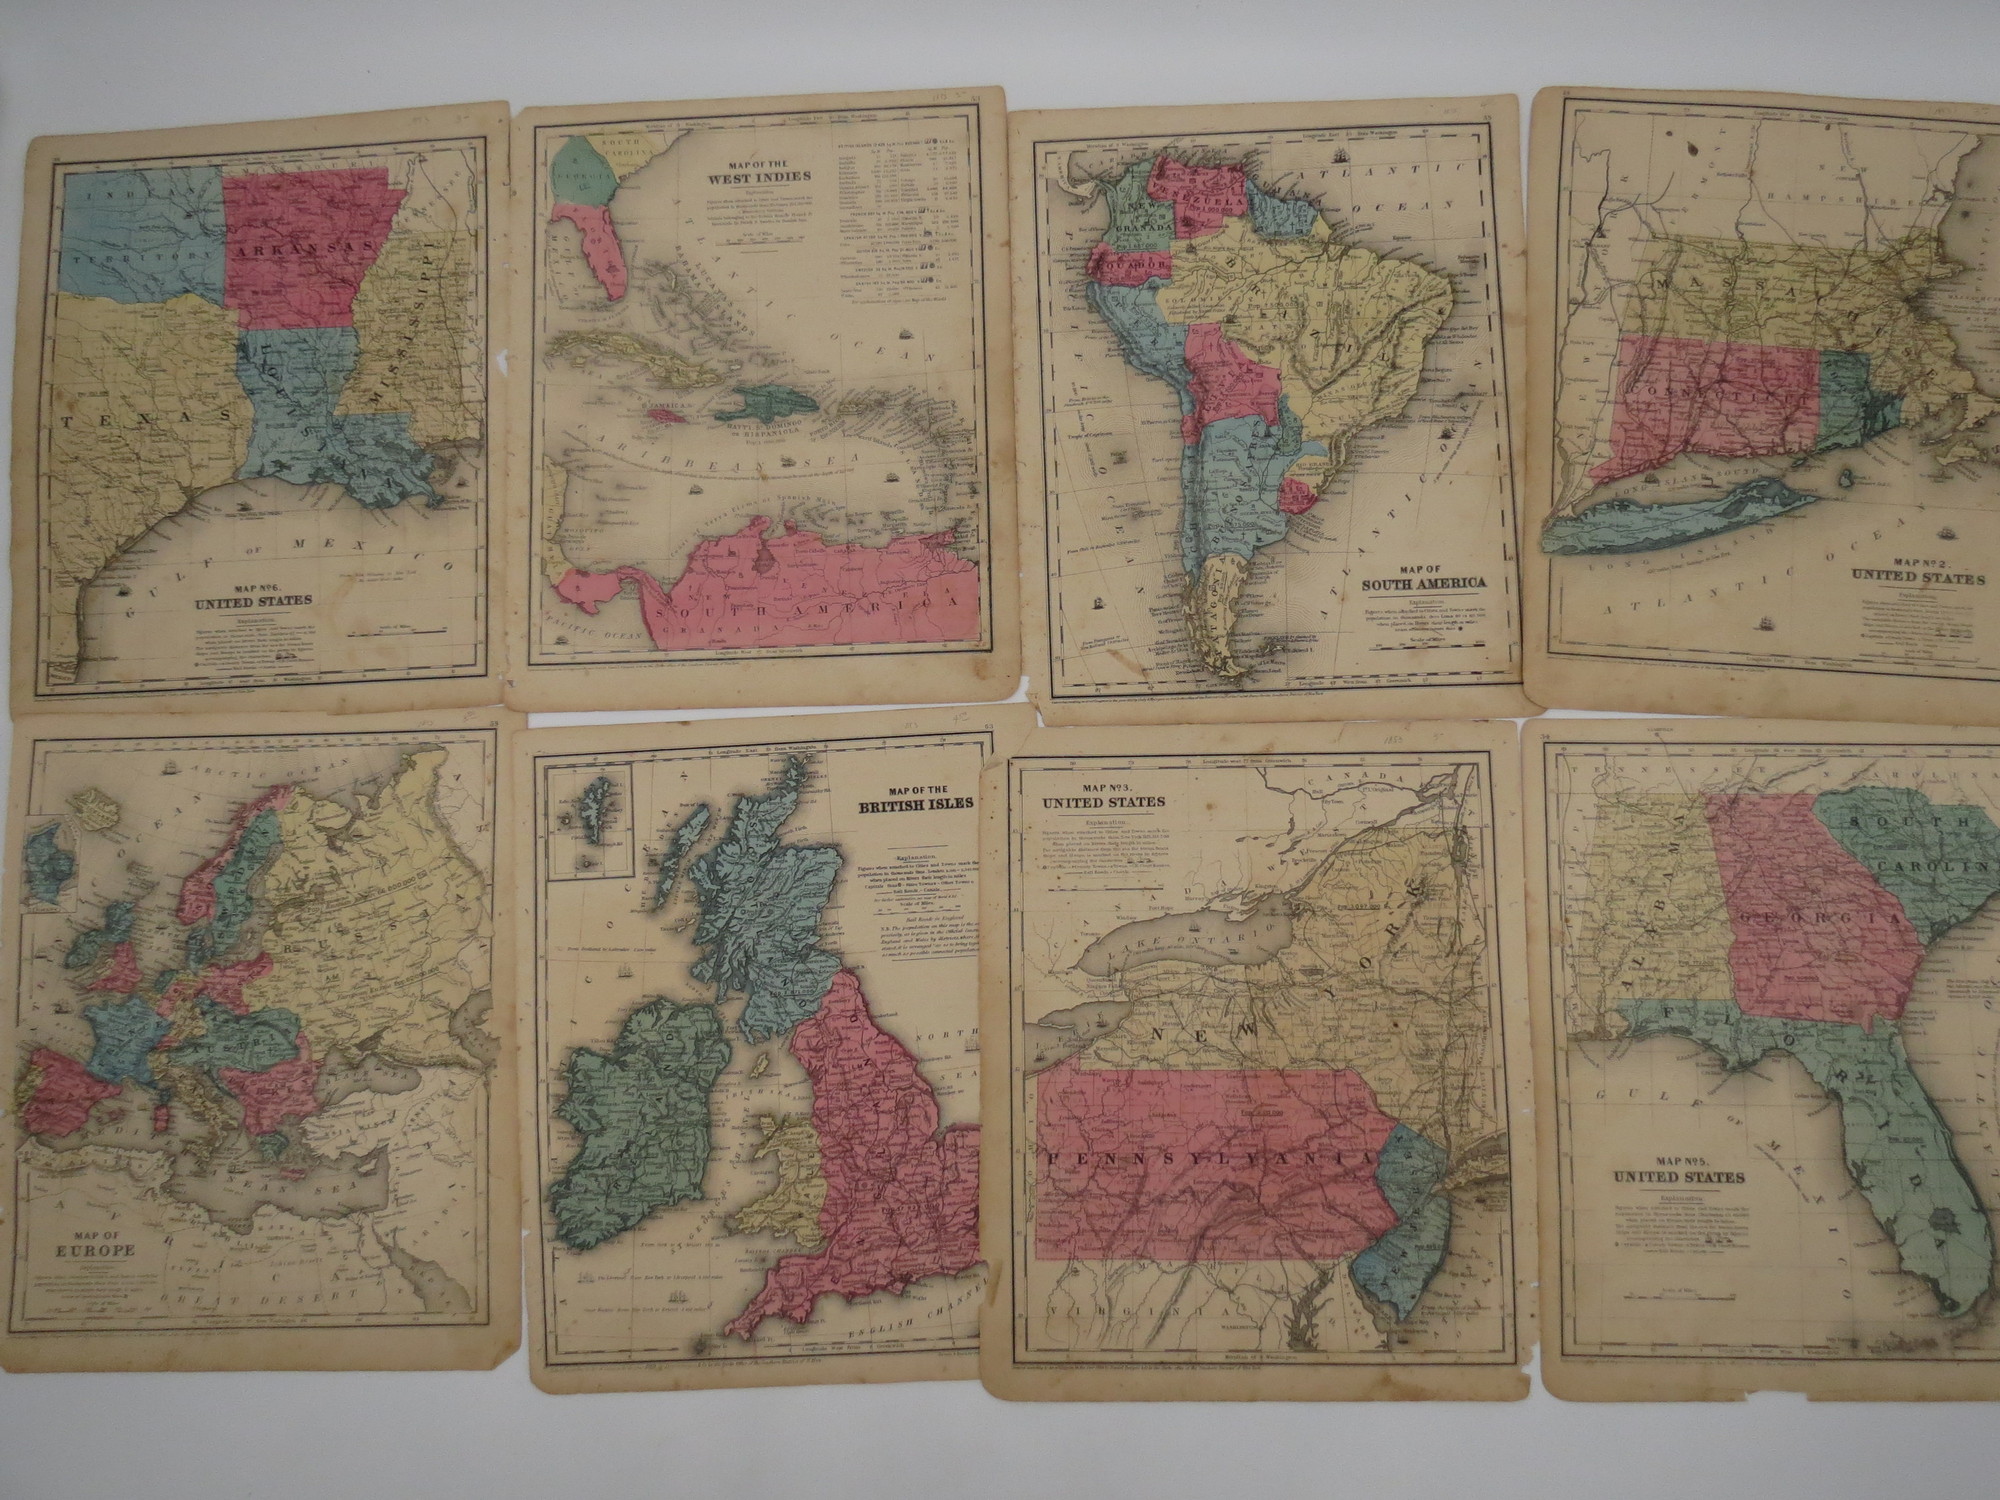 Image for 8 HAND-COLORED ATLAS MAPS 1847-1853 CADY & BURGESS - UNITED STATES, SOUTH AMERICA, EUROPE, BRITISH ISLES